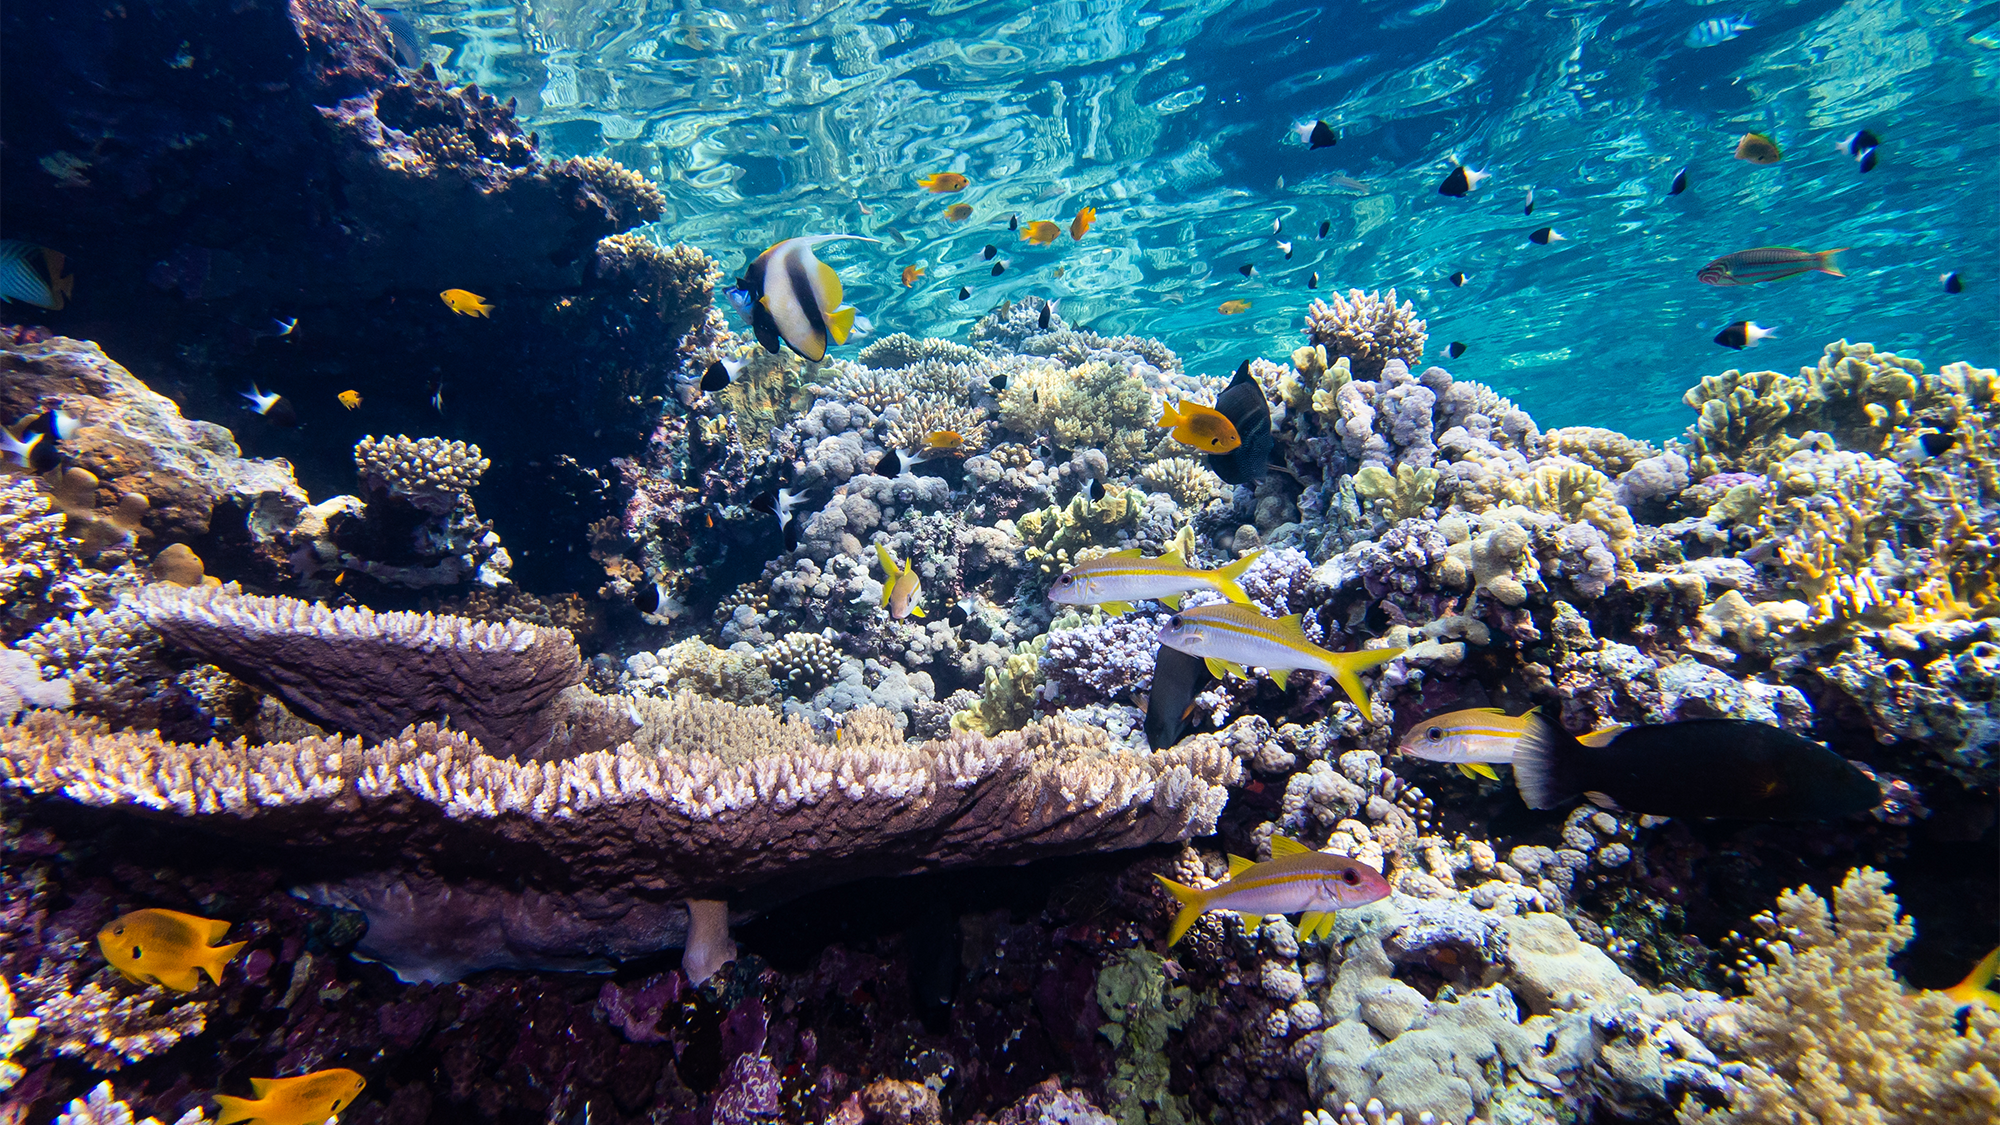 Light pollution may trigger coral reefs to spawn | Popular Science